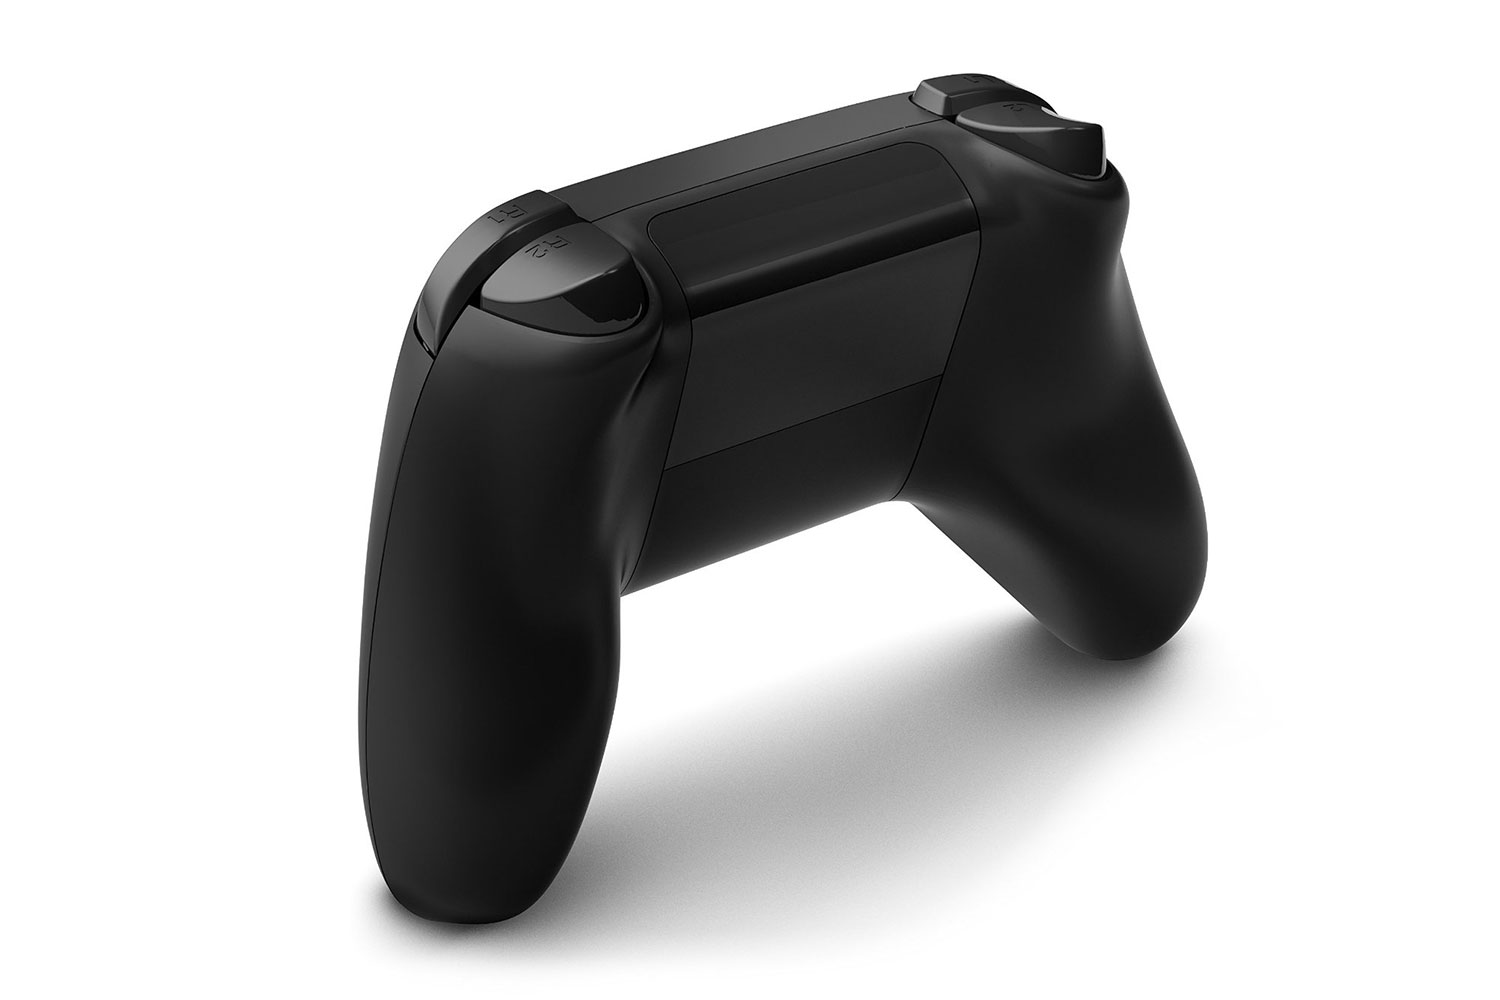 amazon fire tv 2015 news all new game controller sl1500